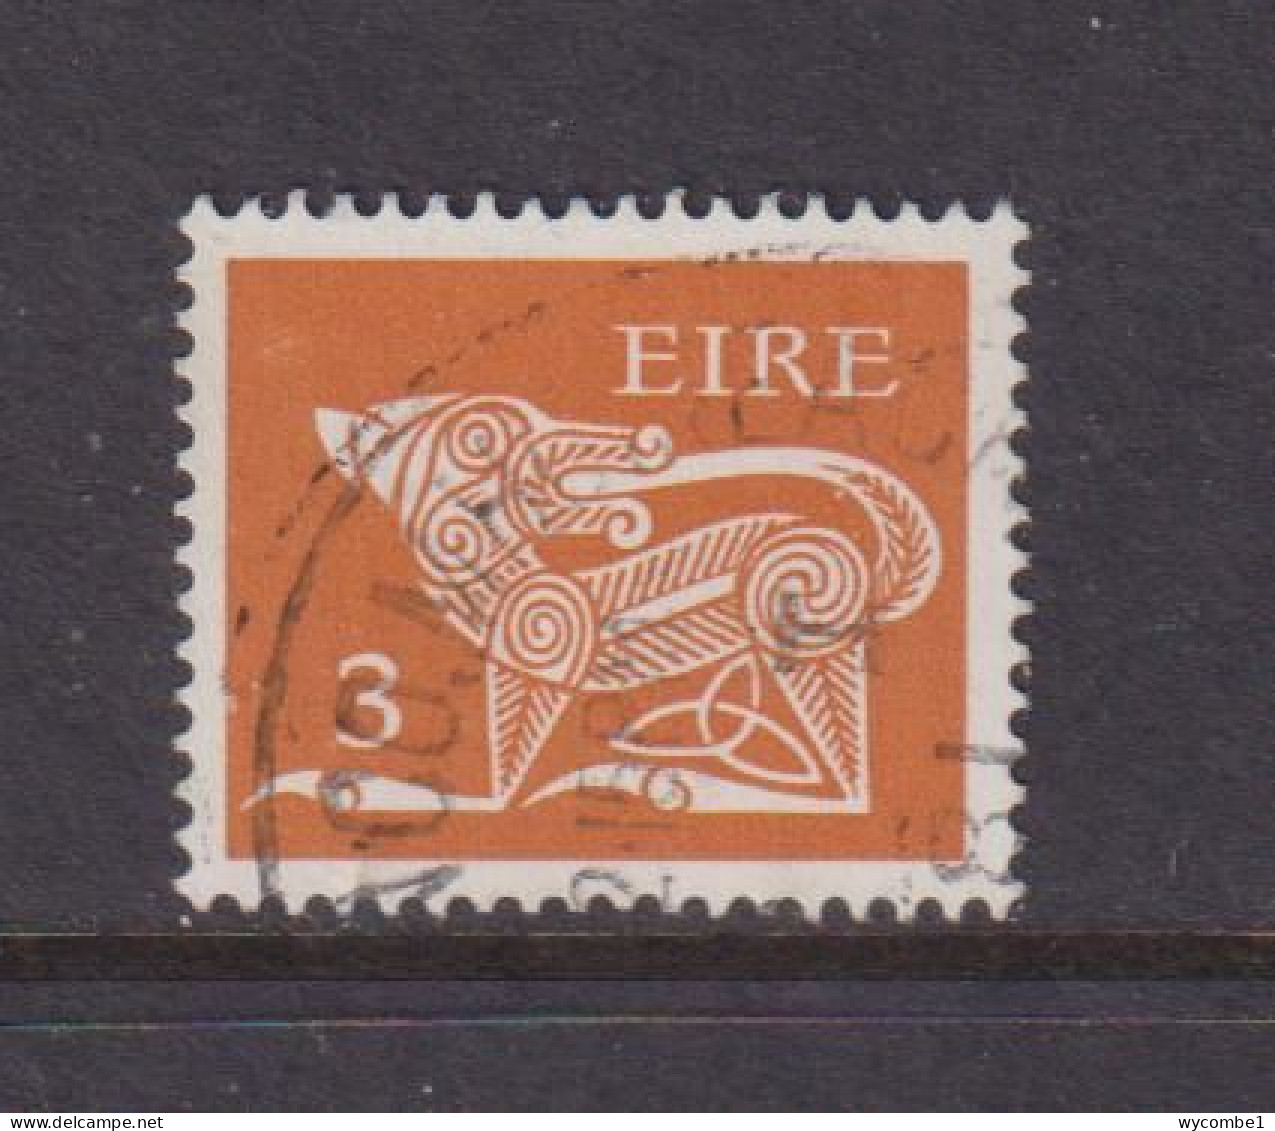 IRELAND - 1971  Decimal Currency Definitives  3p  Used As Scan - Usados